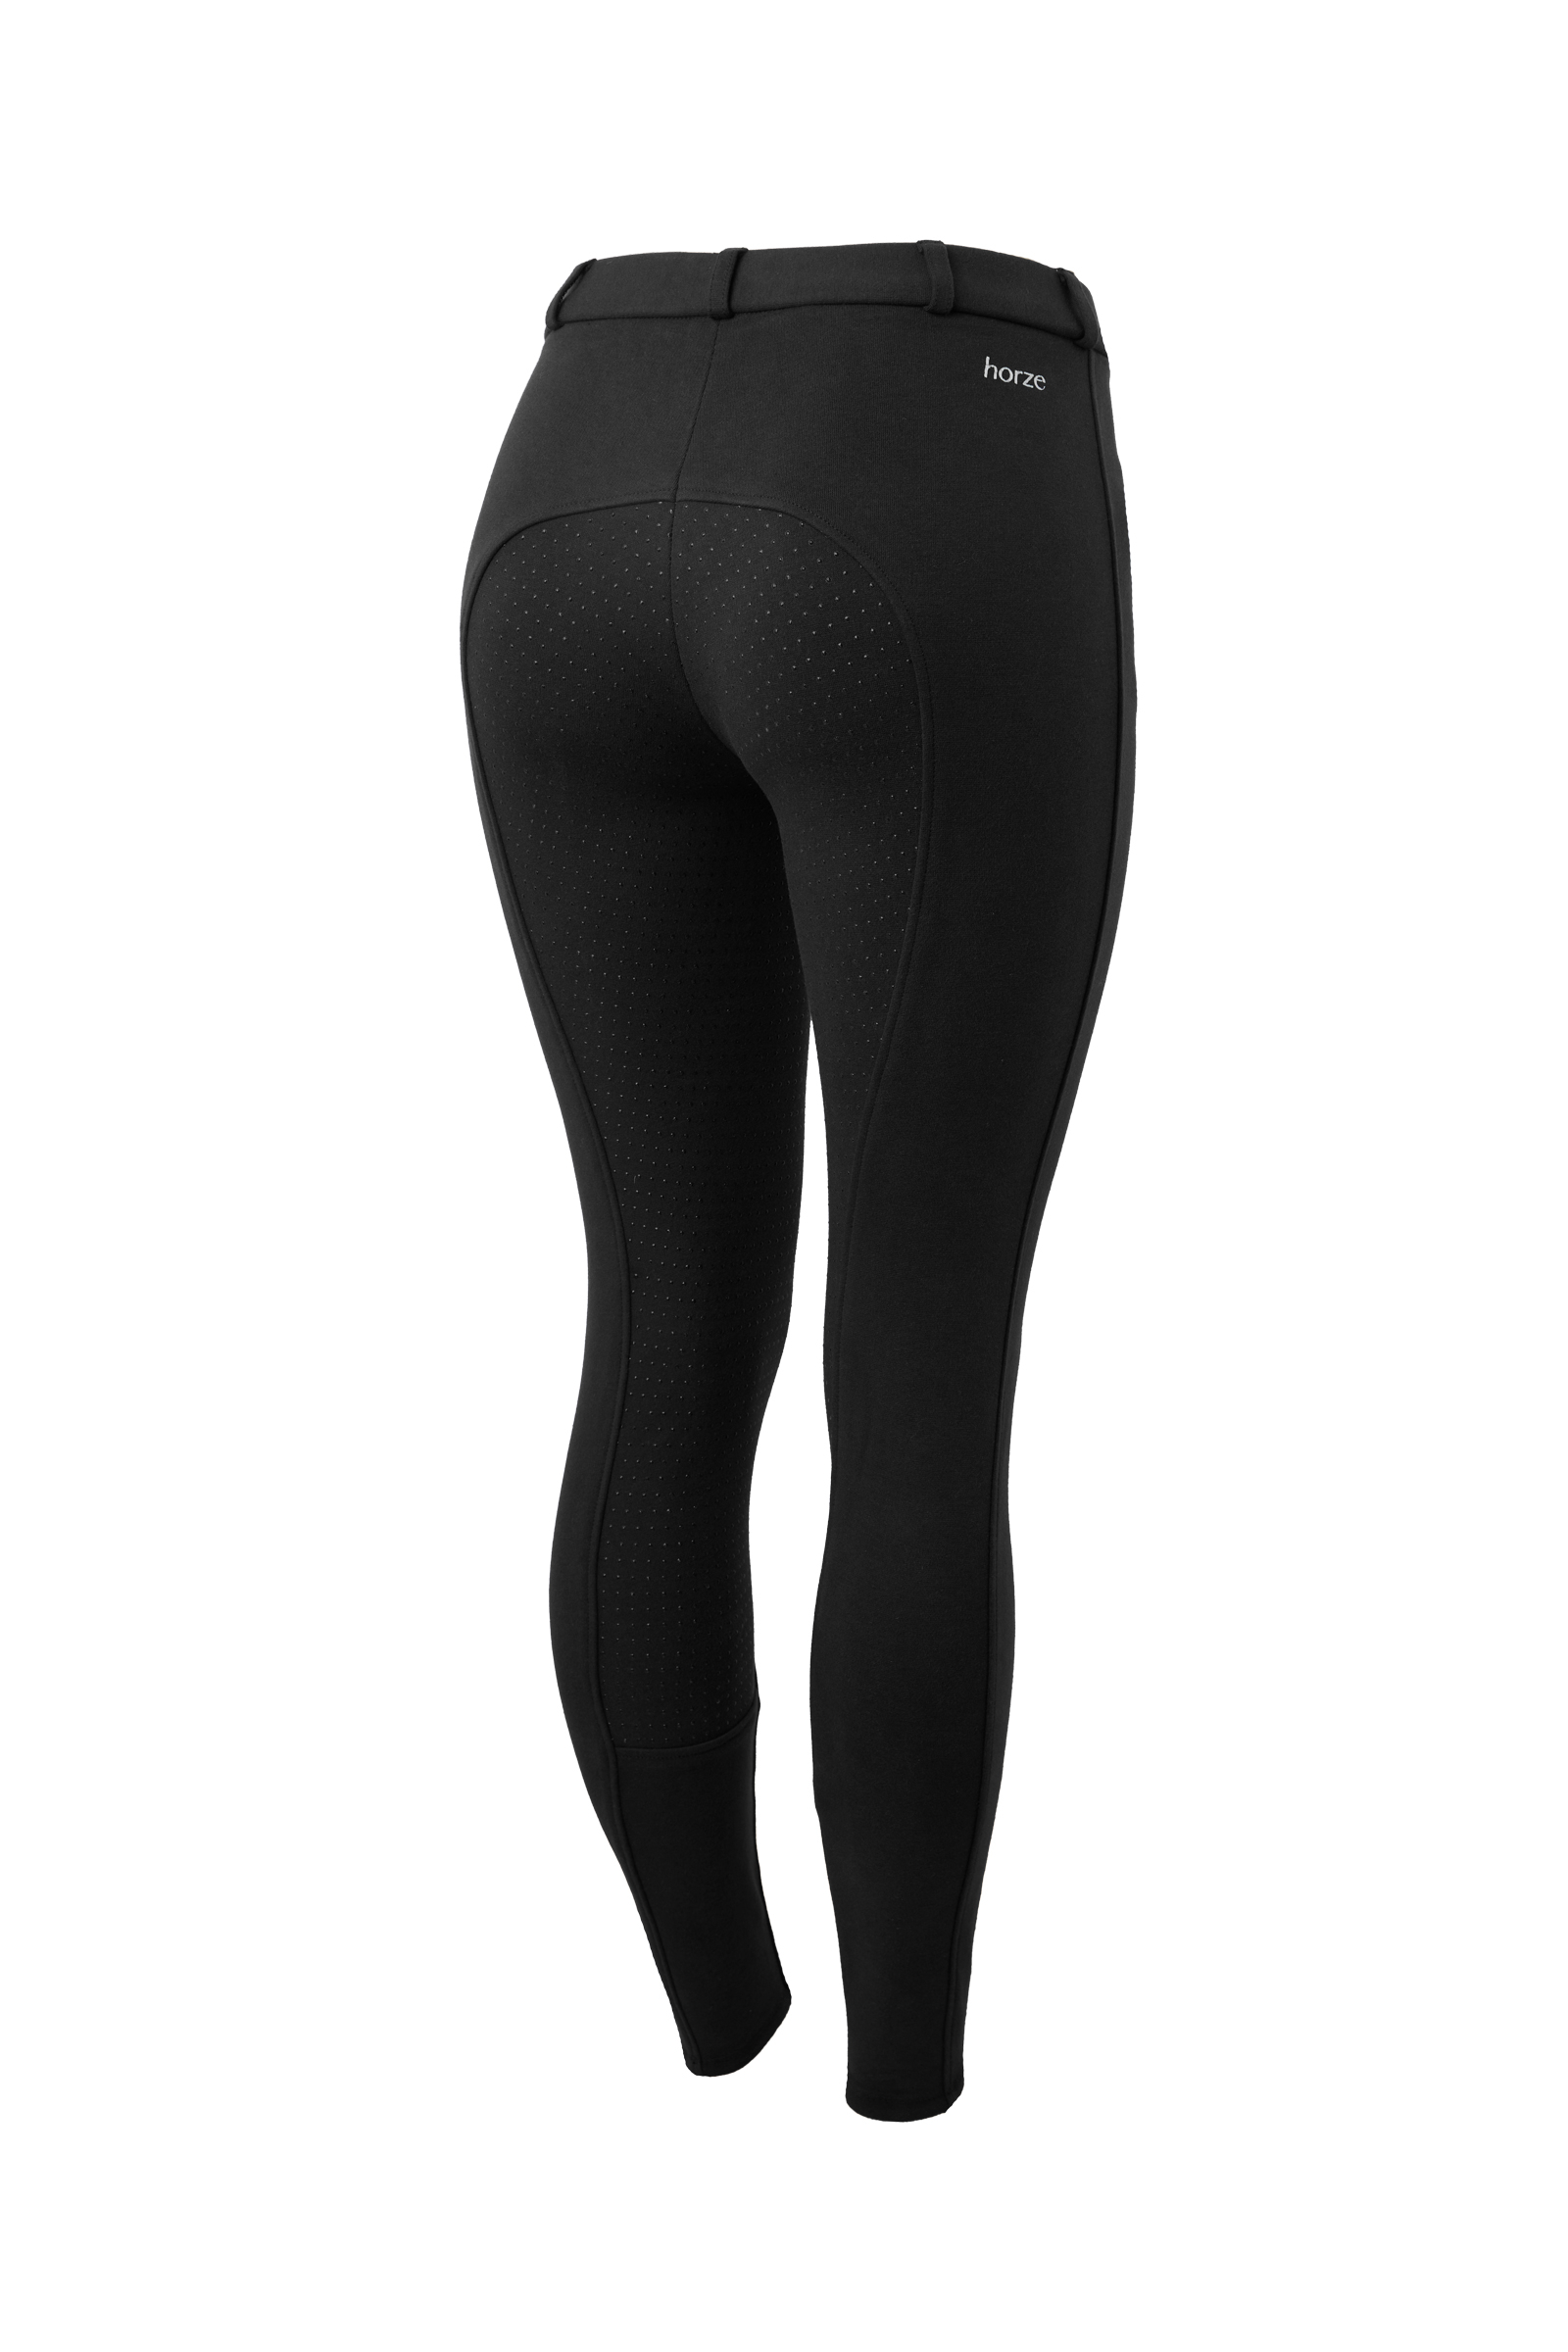 Horze Nadia Women's Silicone Full Seat Riding Tights with 4-Pockets